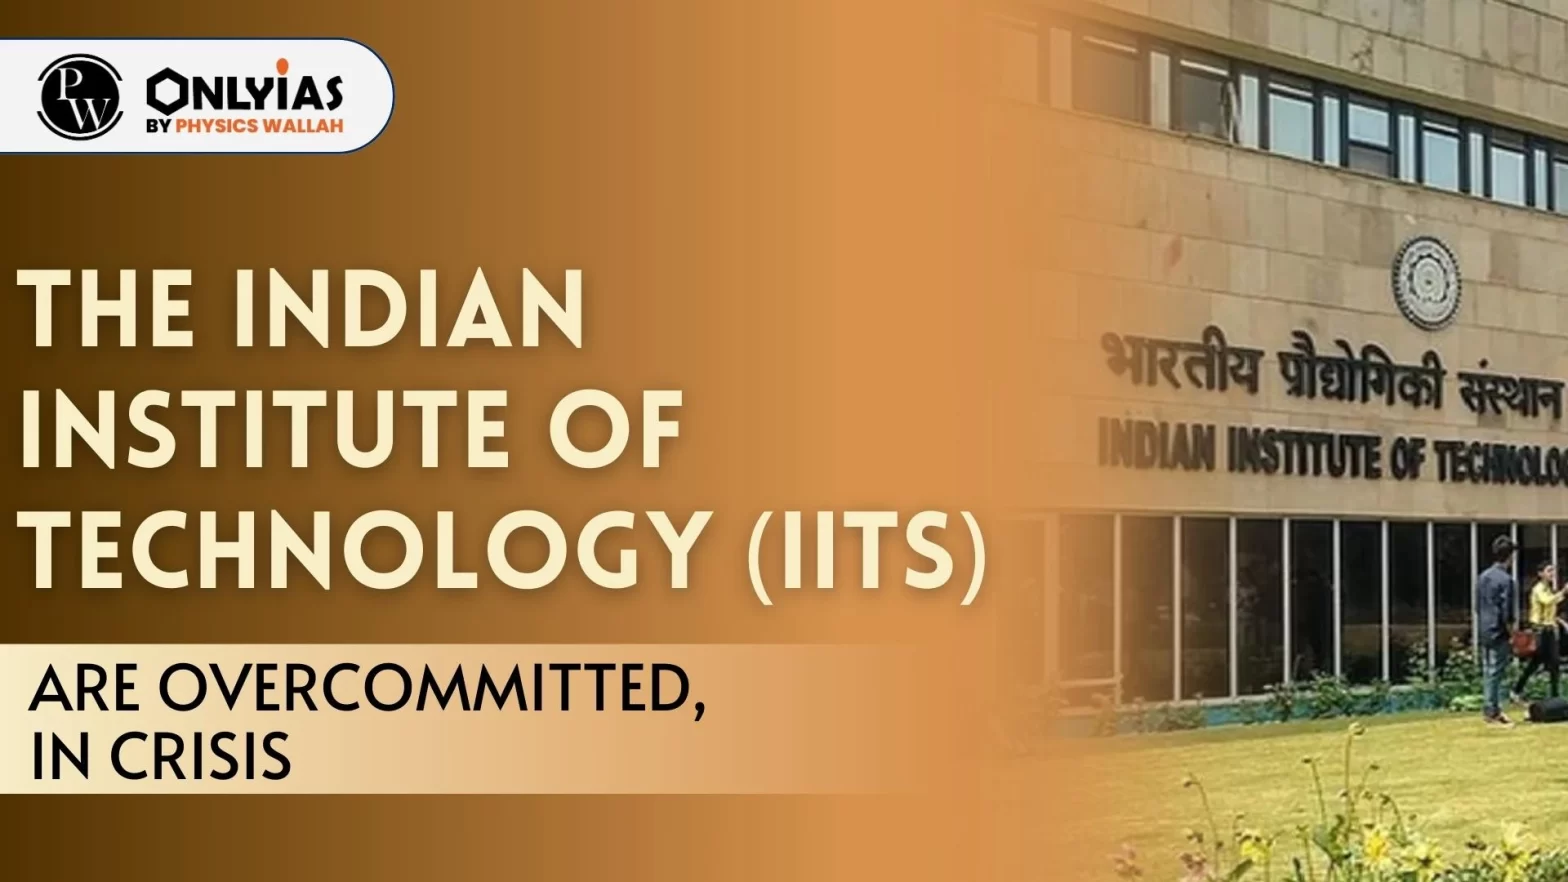 The Indian Institute of Technology (IITs) are Overcommitted, in Crisis